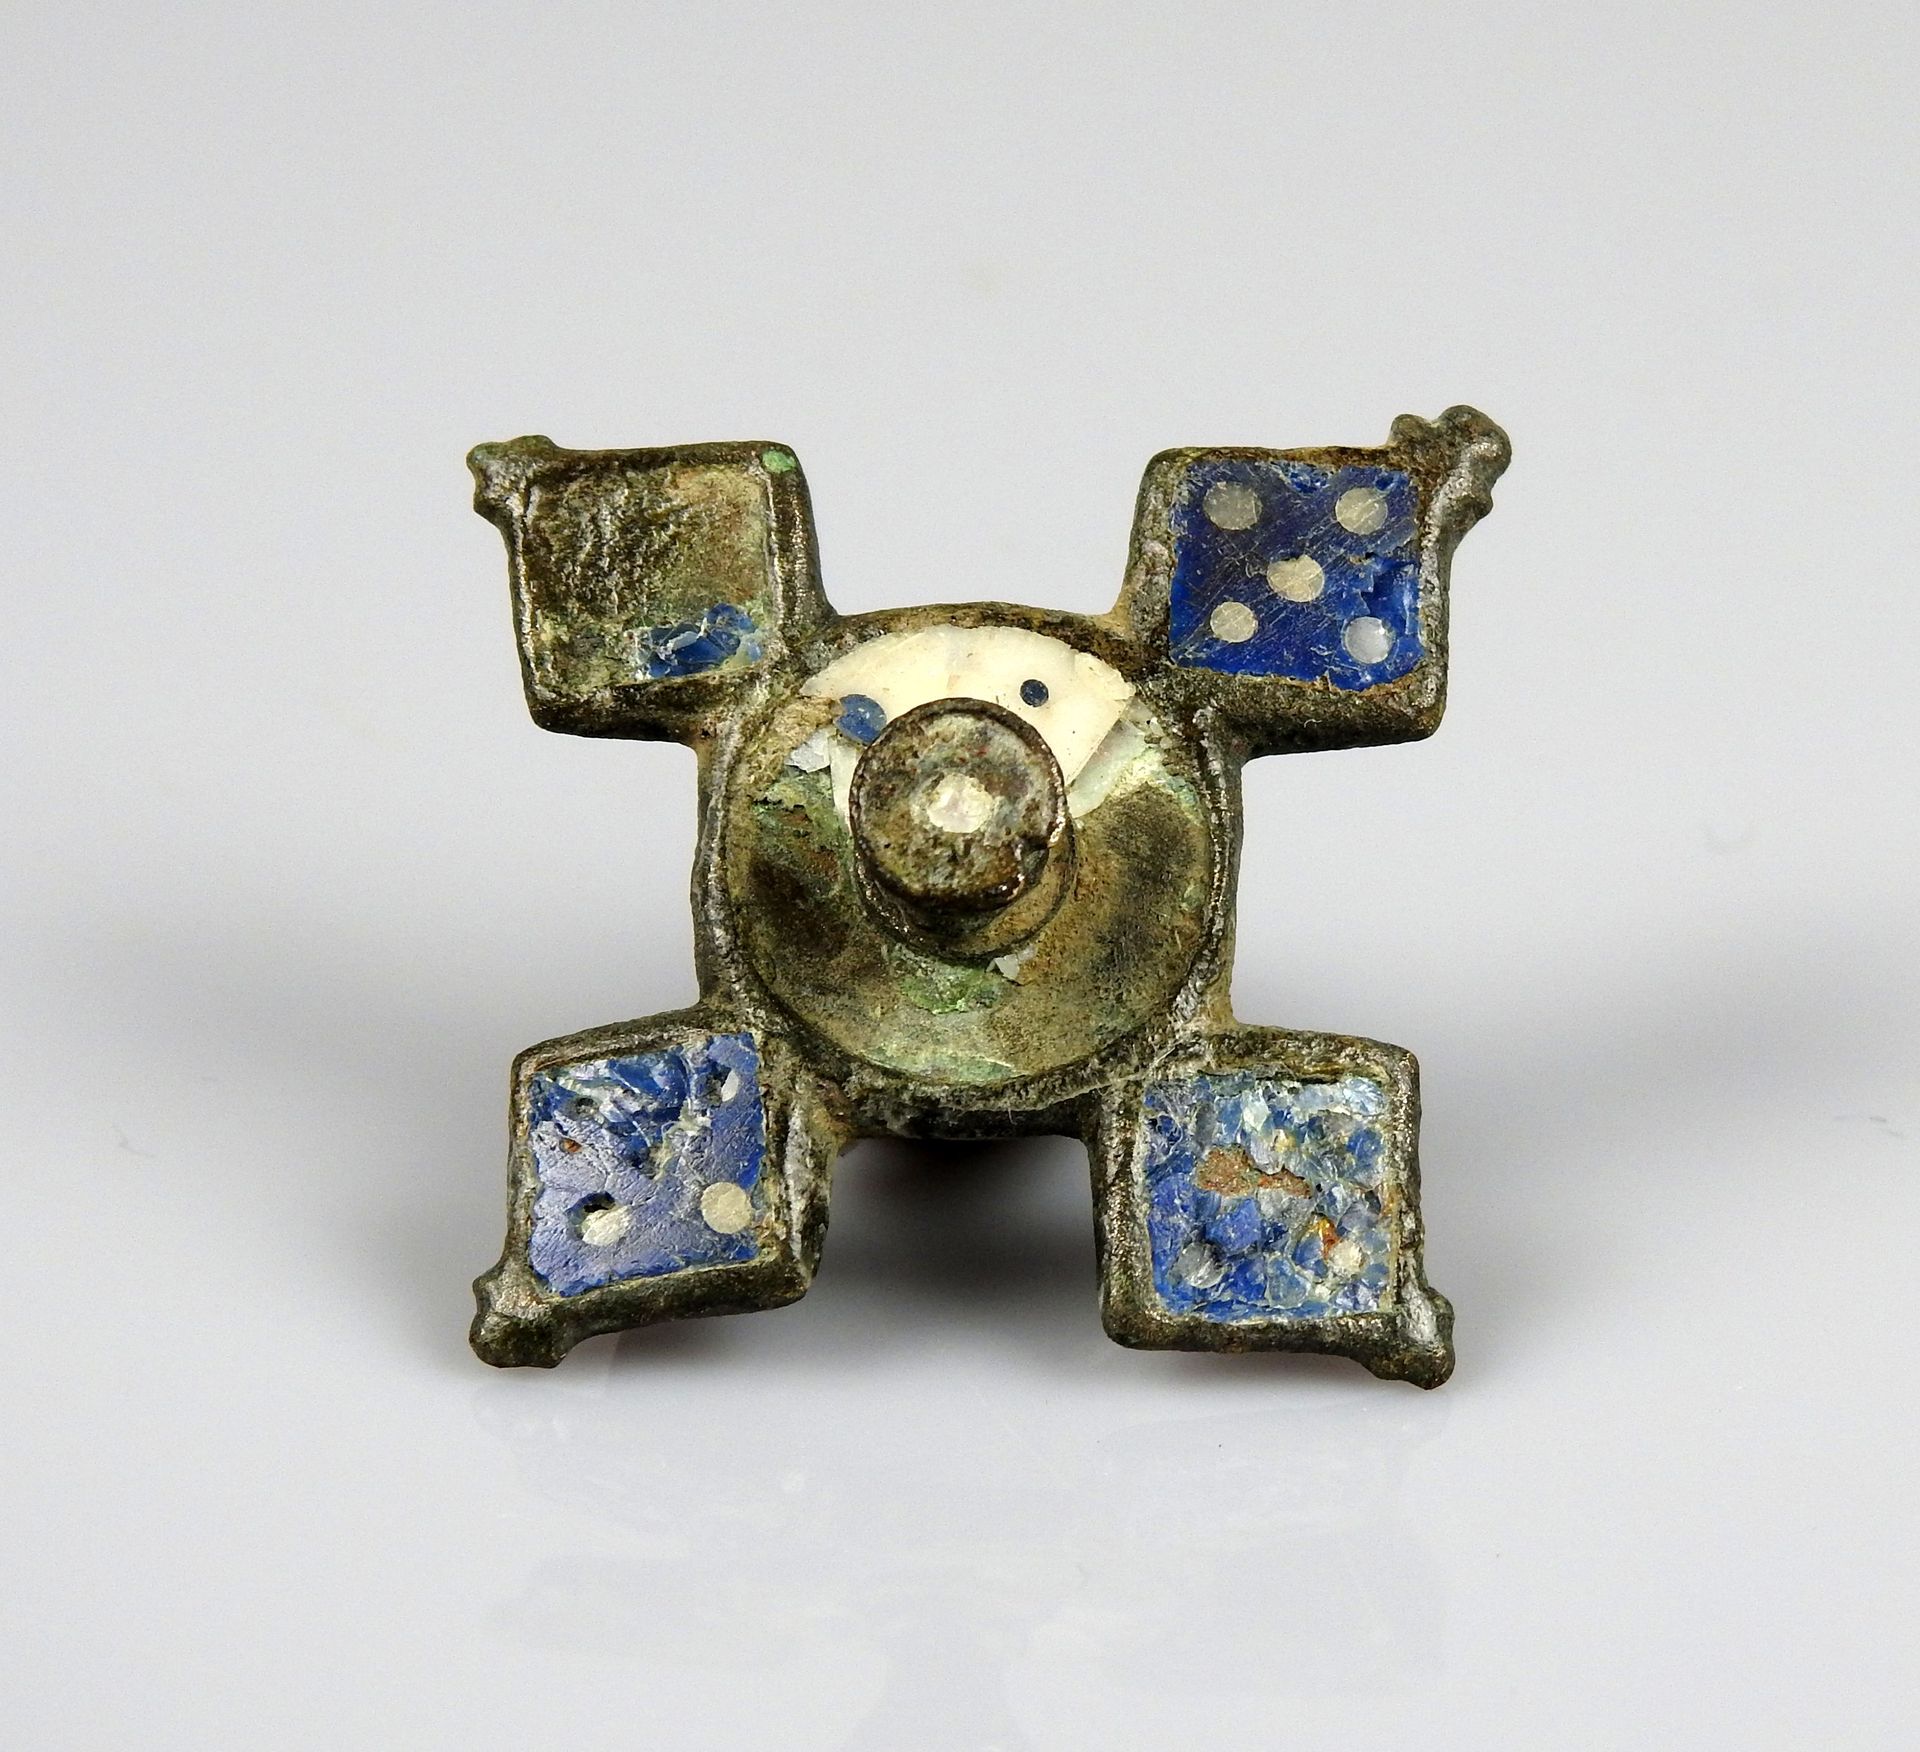 Null Cruciform fibula with blue enamels in diamond-shaped boxes around a central&hellip;